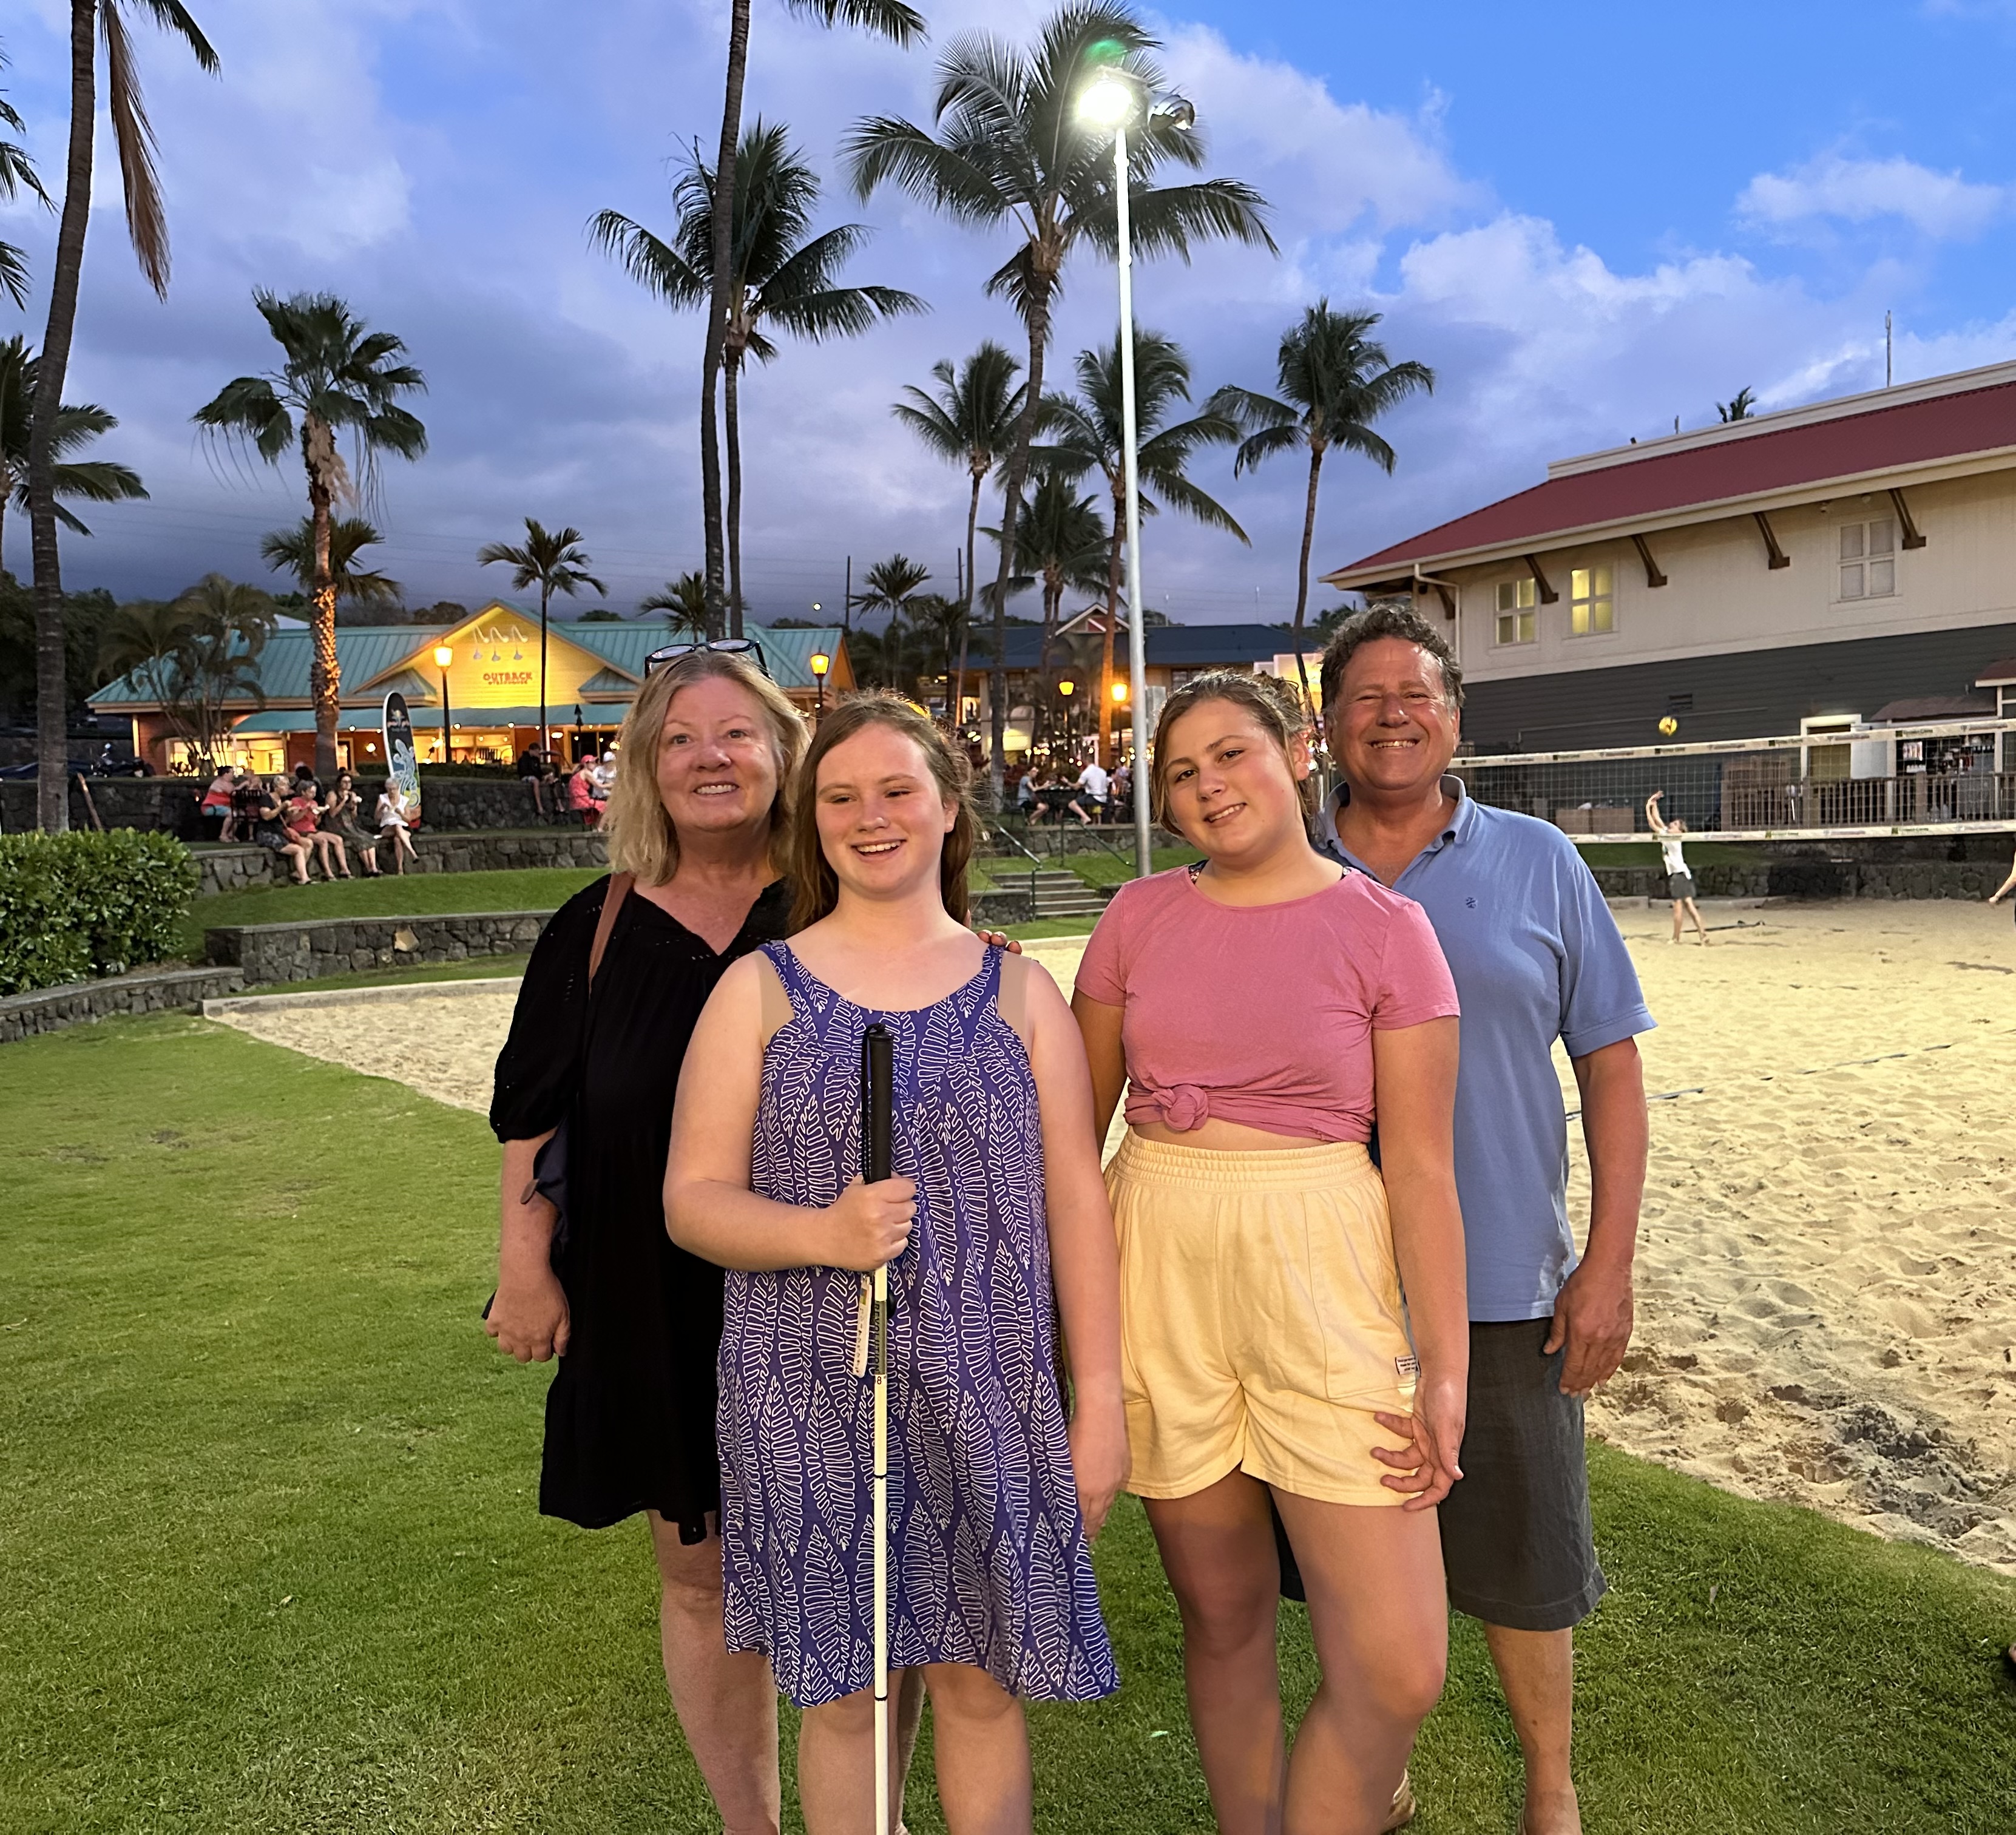 This picture shows the 4 members of the Dabbieri family standing on a grassy area near a beach in Hawaii. Julie Dabbieri is on the far left, wairing a black dress and has shoulder length blond hair. Grace Dabbieri is next to her, wairing a casual blue and white dress and holding a white cane for the blind. She has shoulder length brownish blond hair. The younger girl next to Grace, named Hope is wairing a pink top and yellow shorts. She also has shoulder length blond hair. The man on the right, Jon, is wairing a light blue shirt, and grey shorts. He has short brown hair. Behind them, there are tall palm trees, a sandy beech, and buildings with people arround. The sky above is a pretty blue and pink, indocating its evening time.